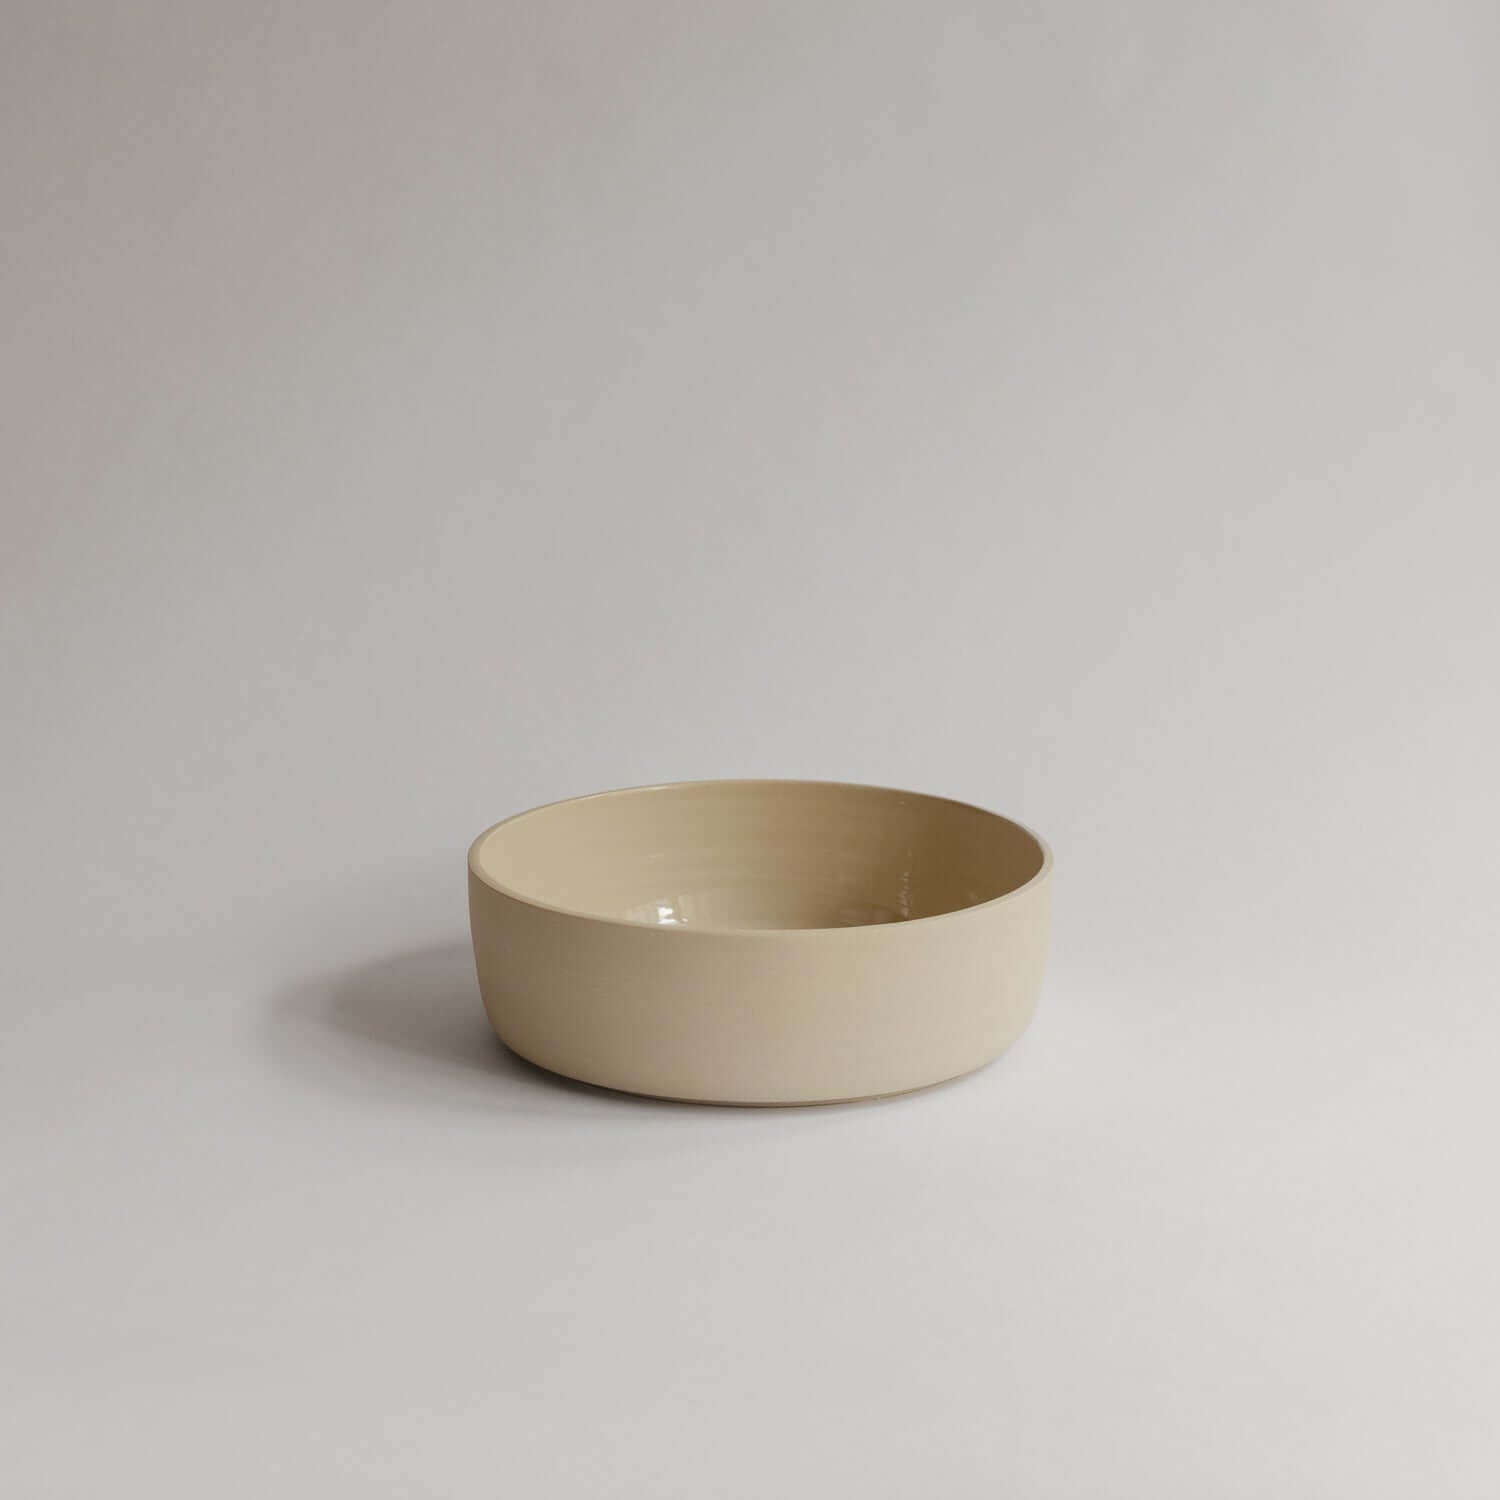 Elevate your dining with the unique Nomi Creme Pasta Bowl. Handmade grey stoneware with a glossy glaze. Perfect tableware for a modern touch. von viola beuscher ceramics